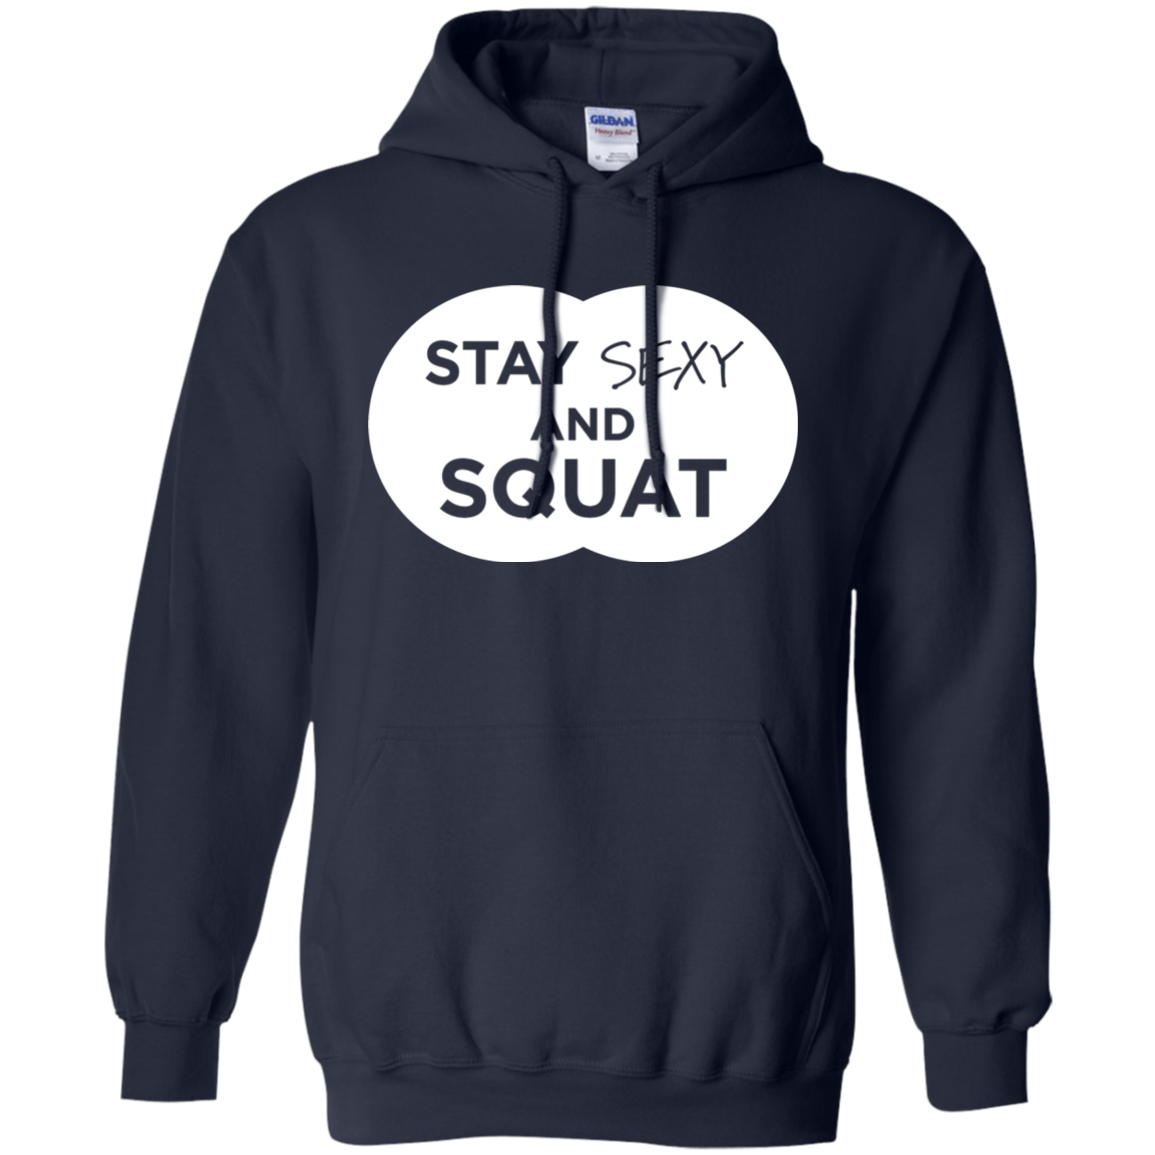 Stay Sexy And Squat